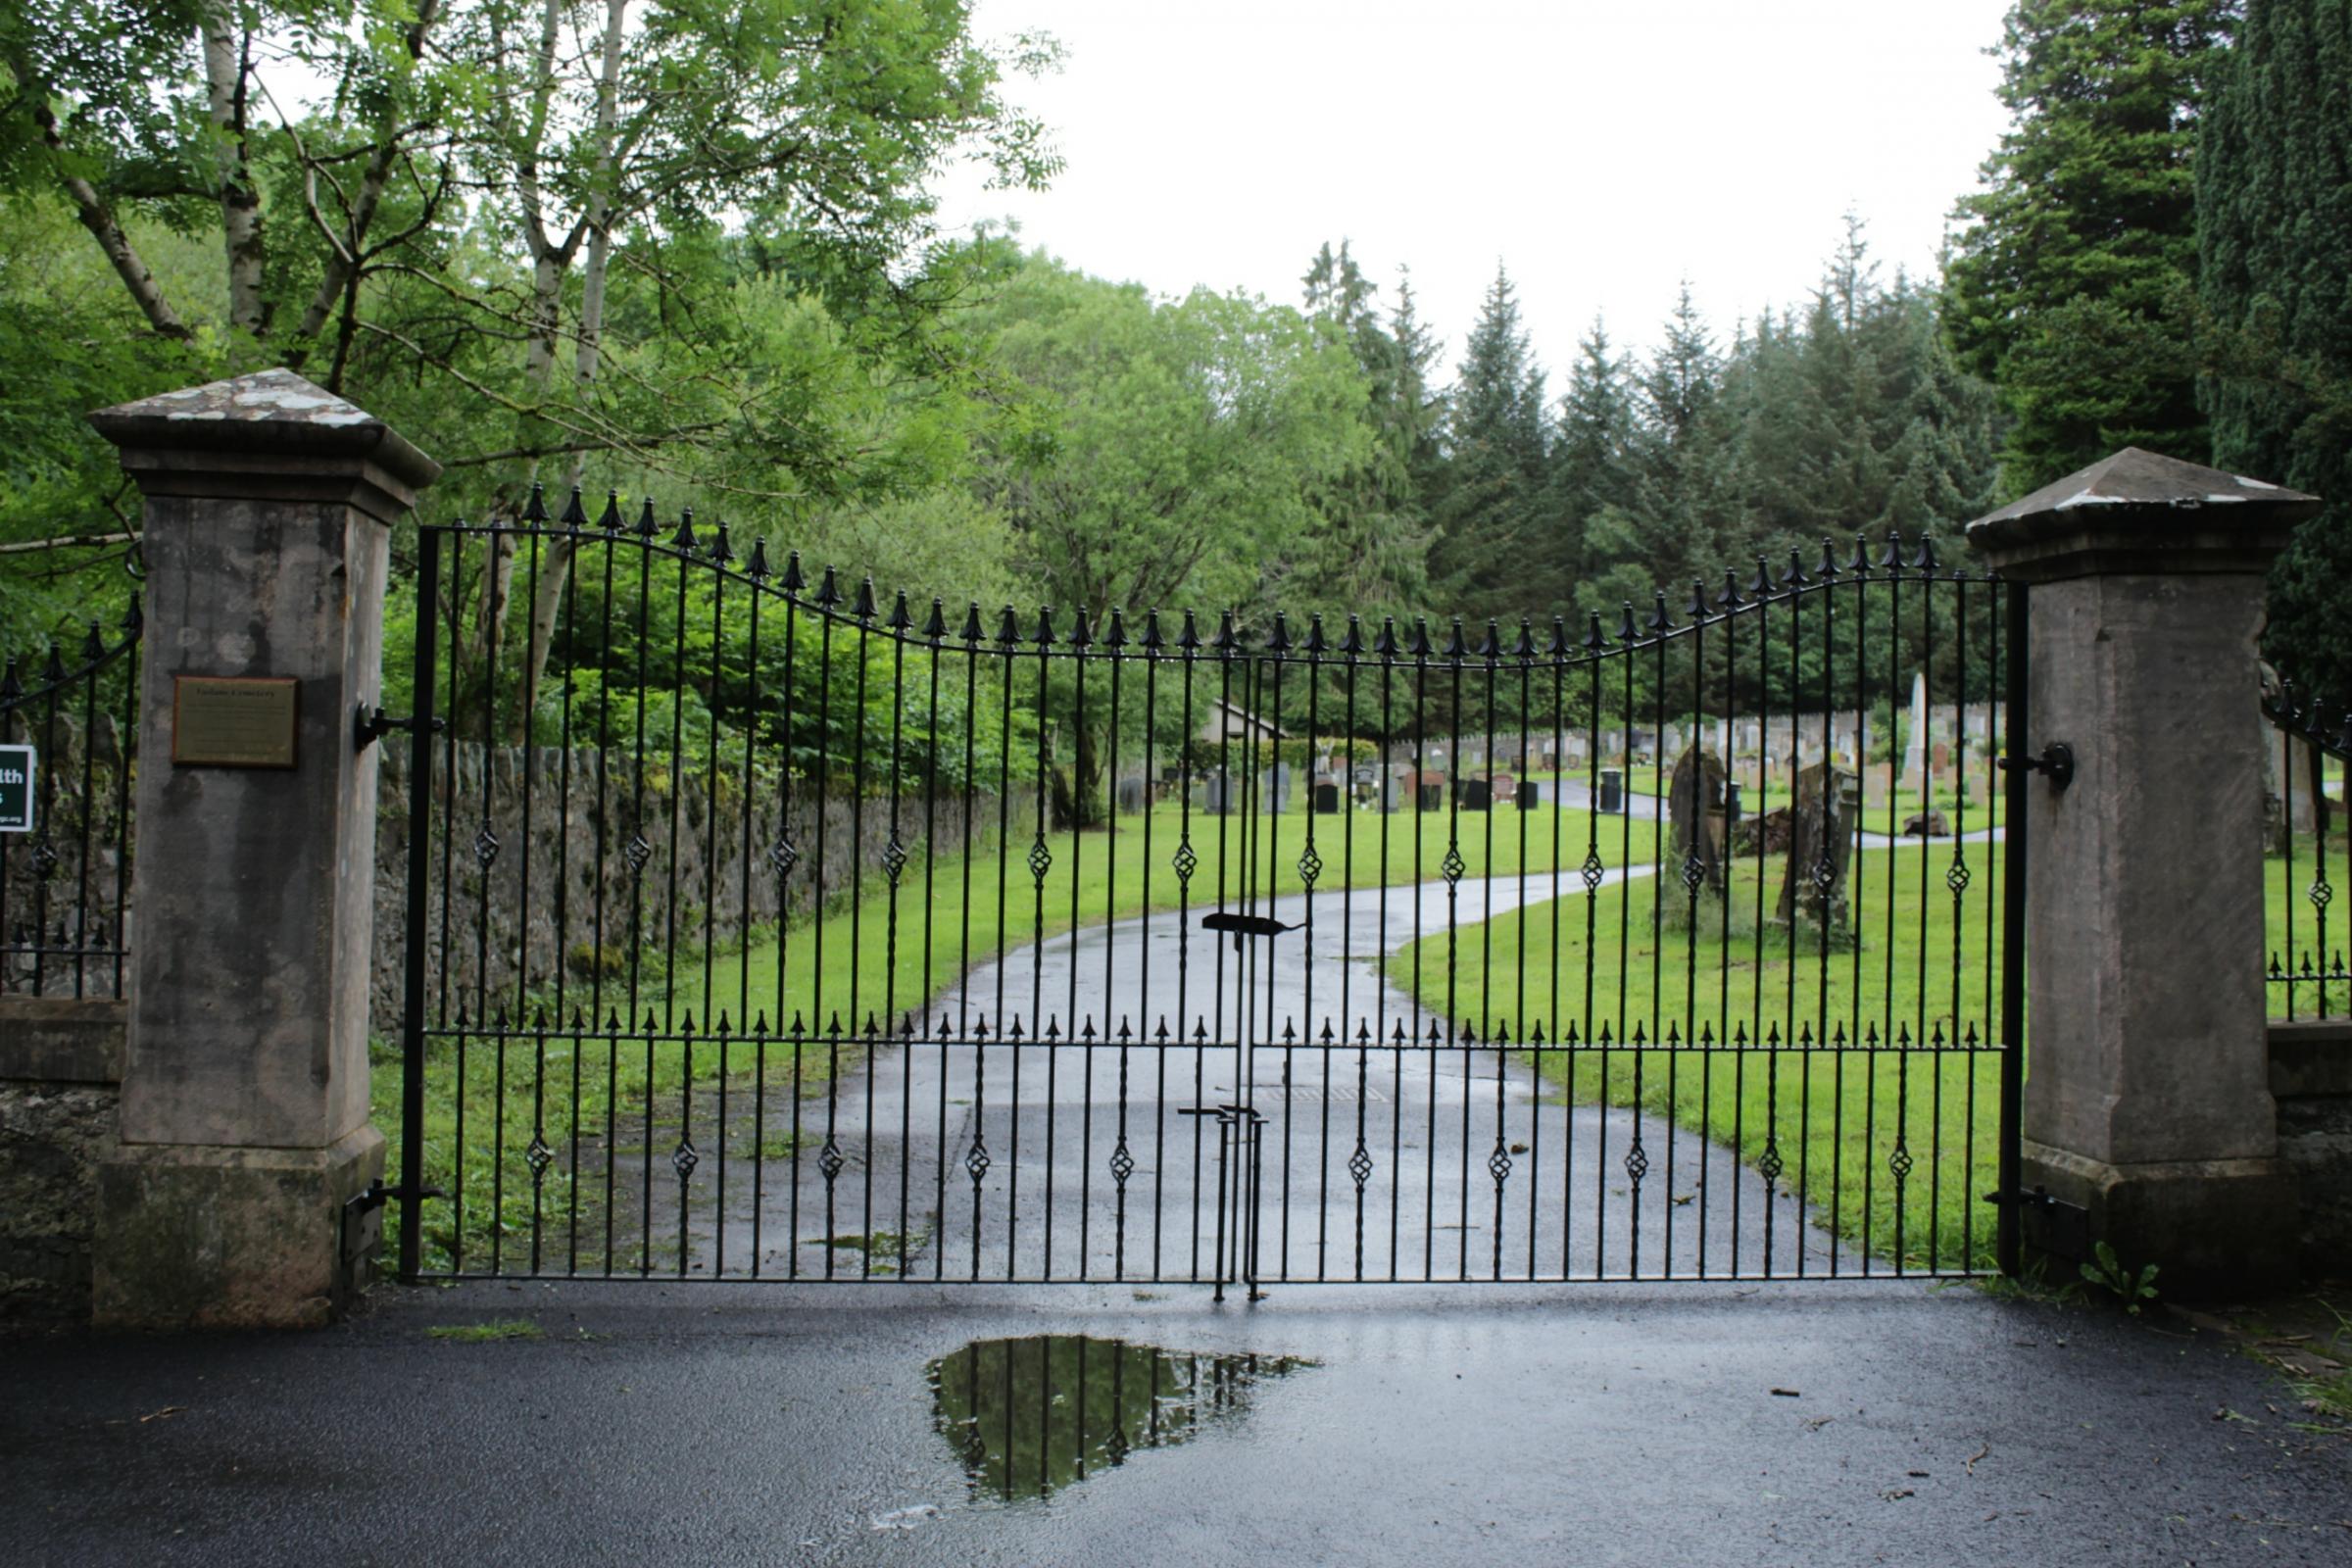 The new gates at the entrance to Faslane Cemetery - and the pillars on either side which have also been restored as part of the refurbishment project (Image: Stella Irving)